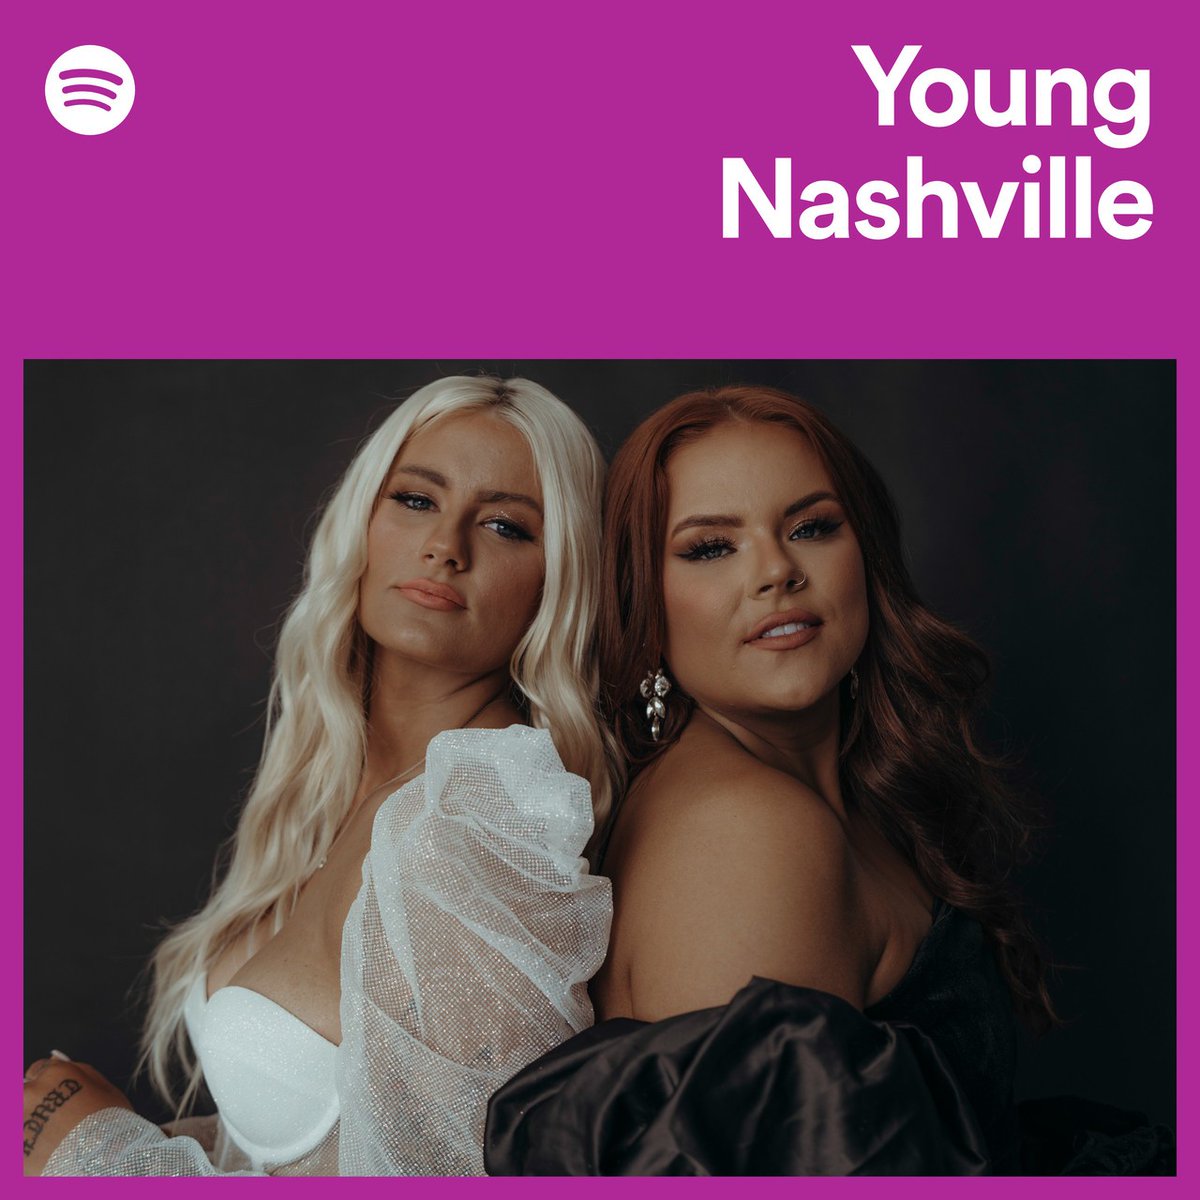 Thank you @Spotify for adding 'Mirror Mirror' to #YoungNashville and making us the cover artist! 🤩 Go stream it now y’all! Let’s get this song heard!! 💕✨ open.spotify.com/playlist/37i9d…